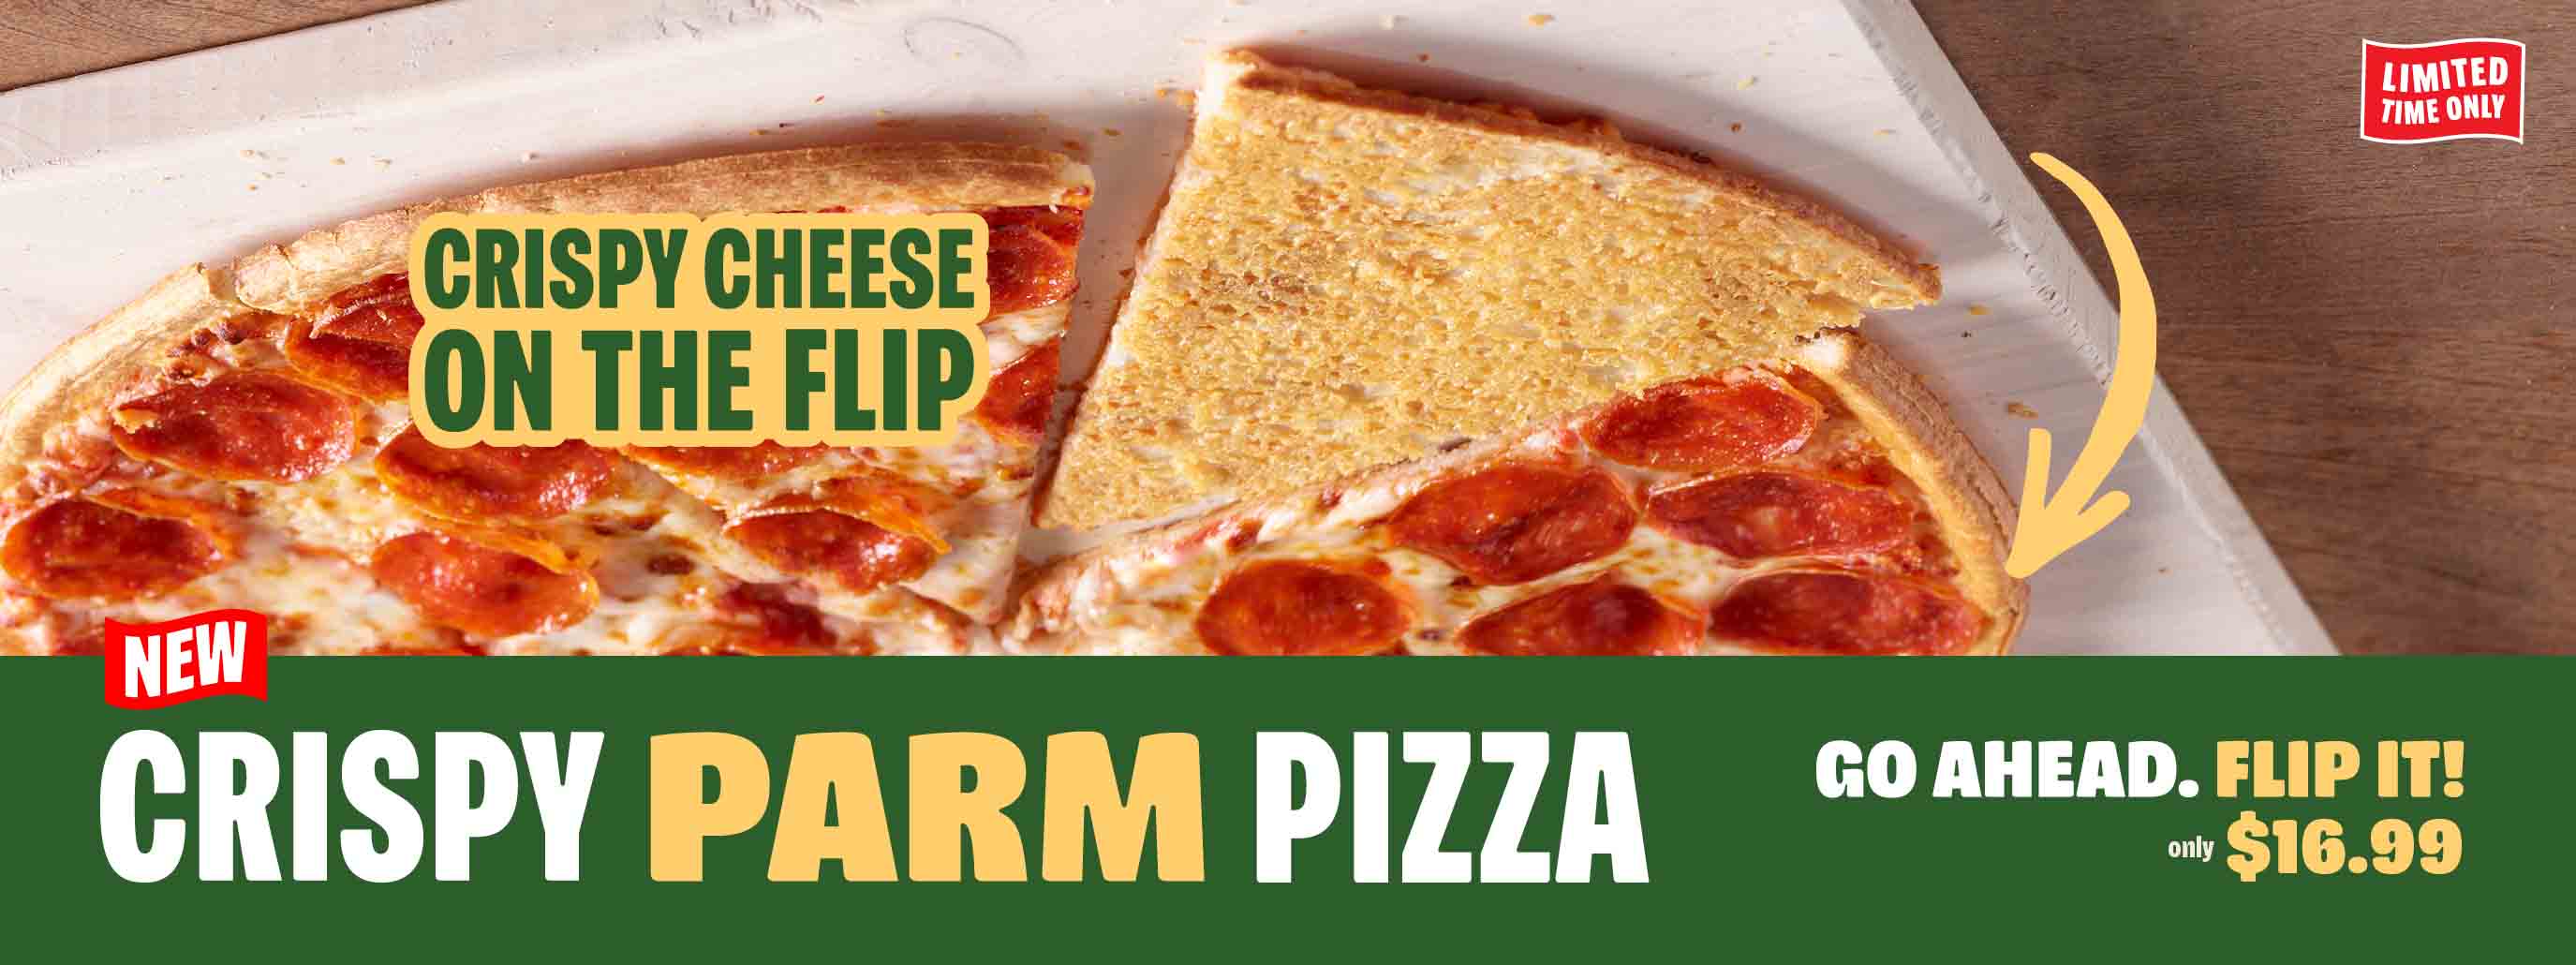 CRISPY PARM PIZZA, $16.99, LIMITED TIME ONLY